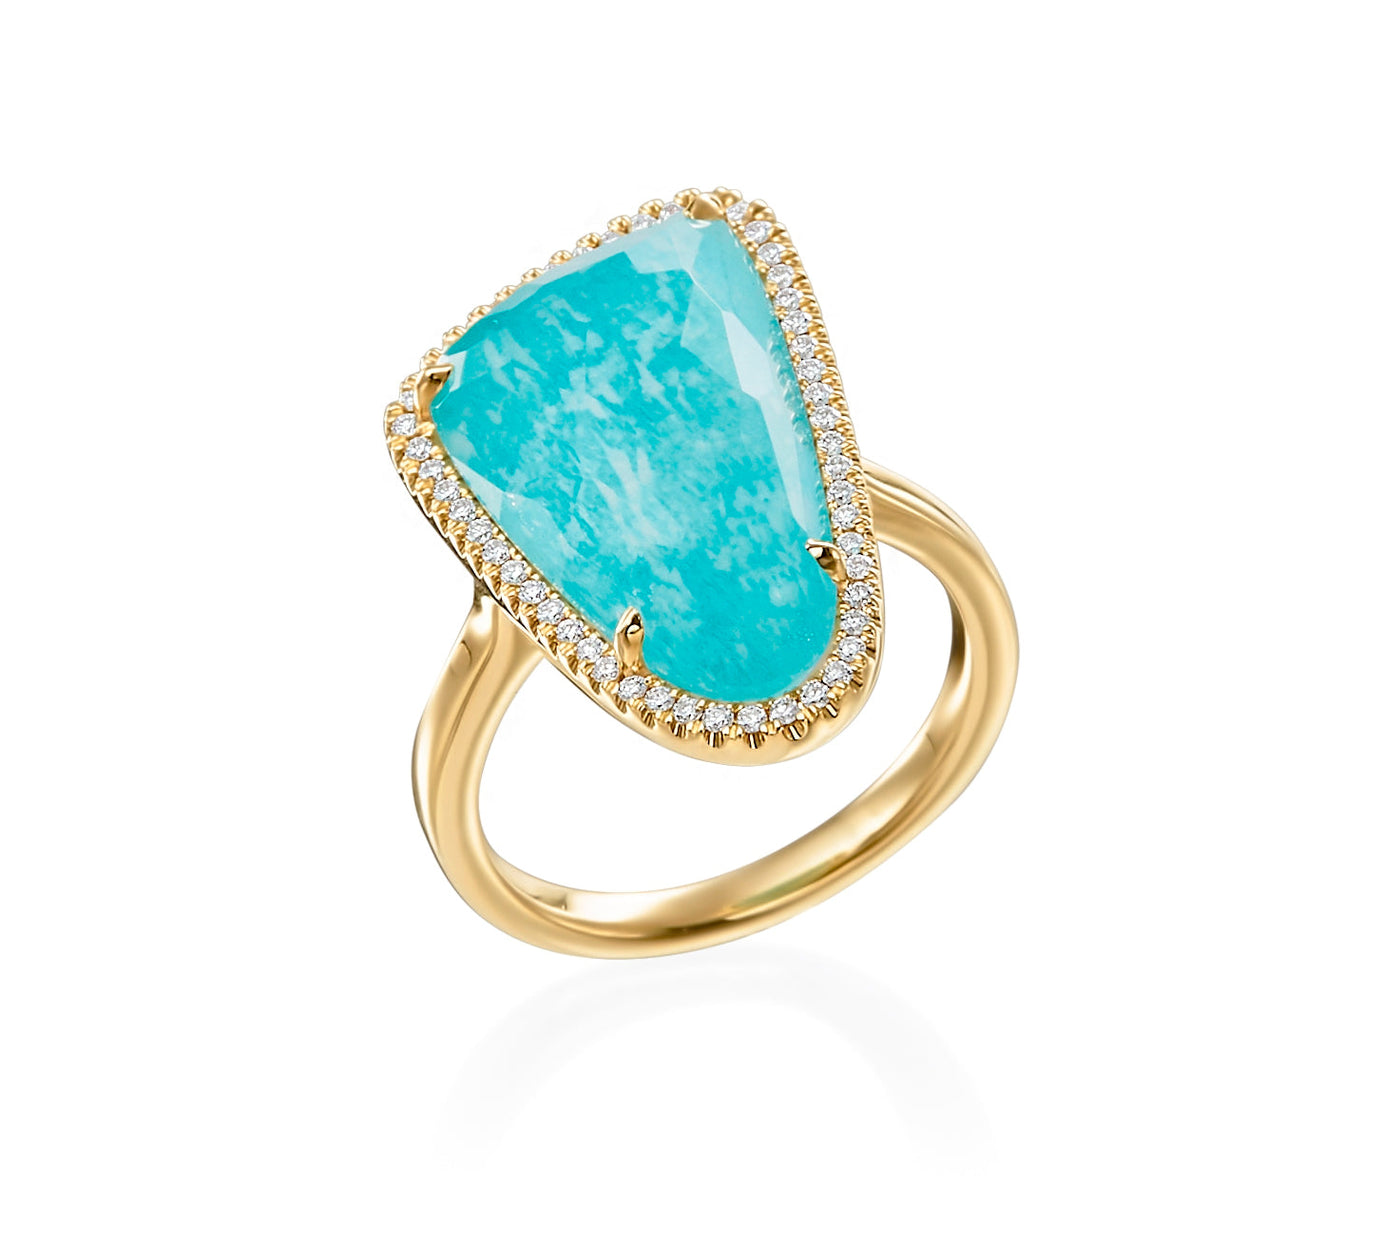 Teal Blue And Gold Elongated Ring